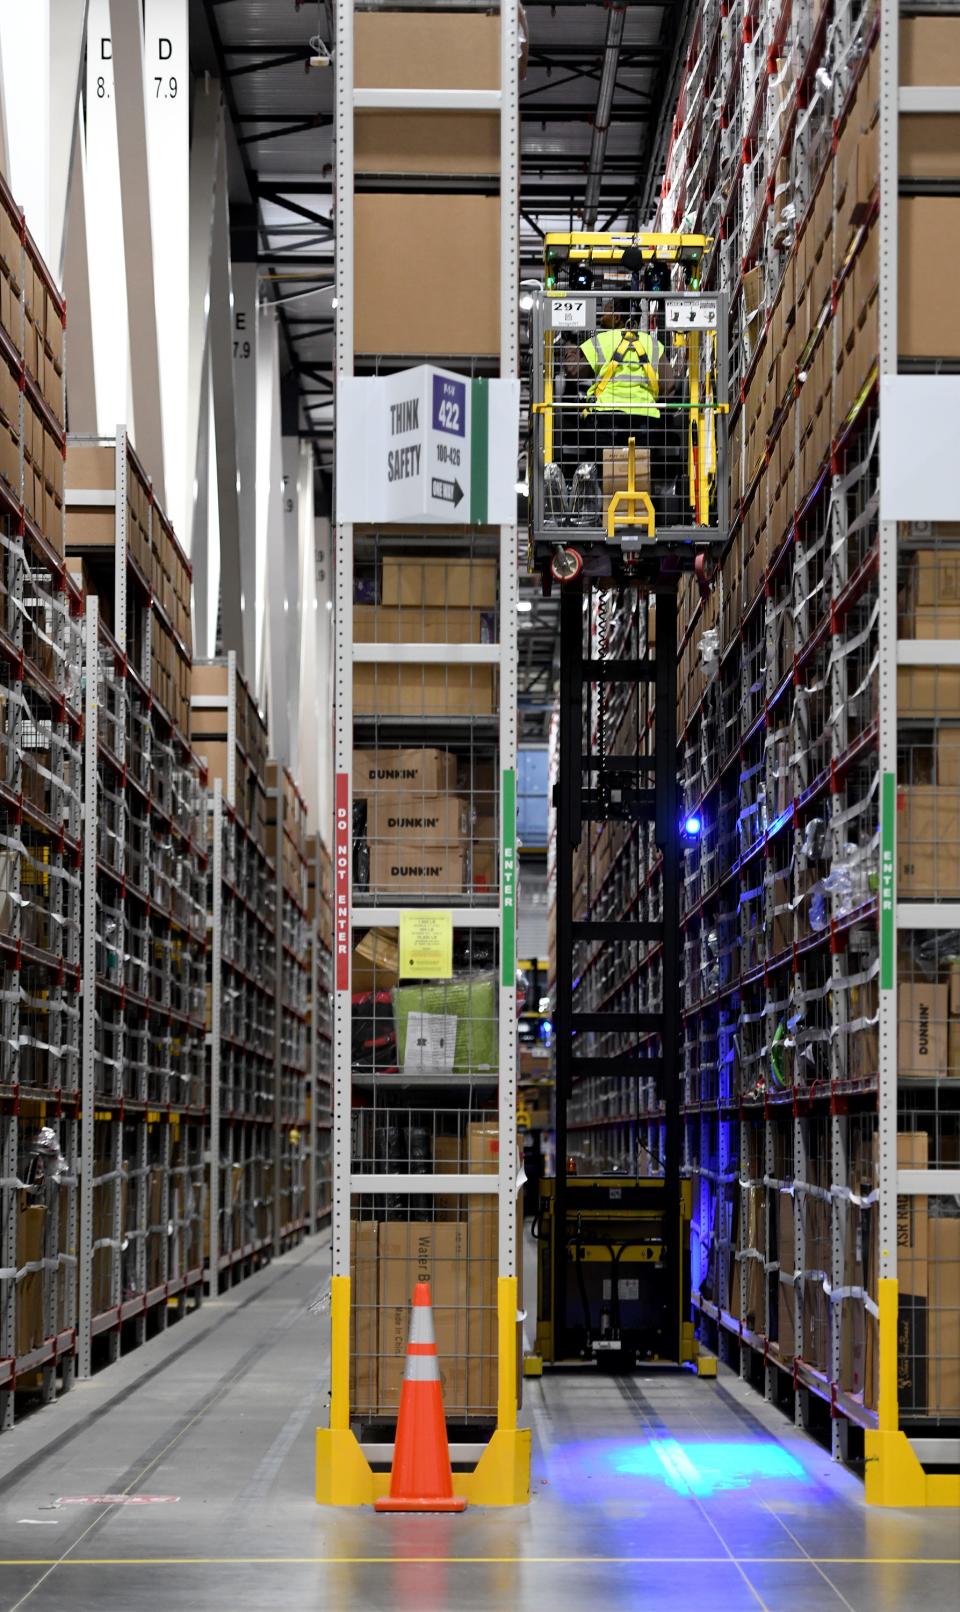 An emplyoyee collects items for an order at the Amazon facility in Canton.